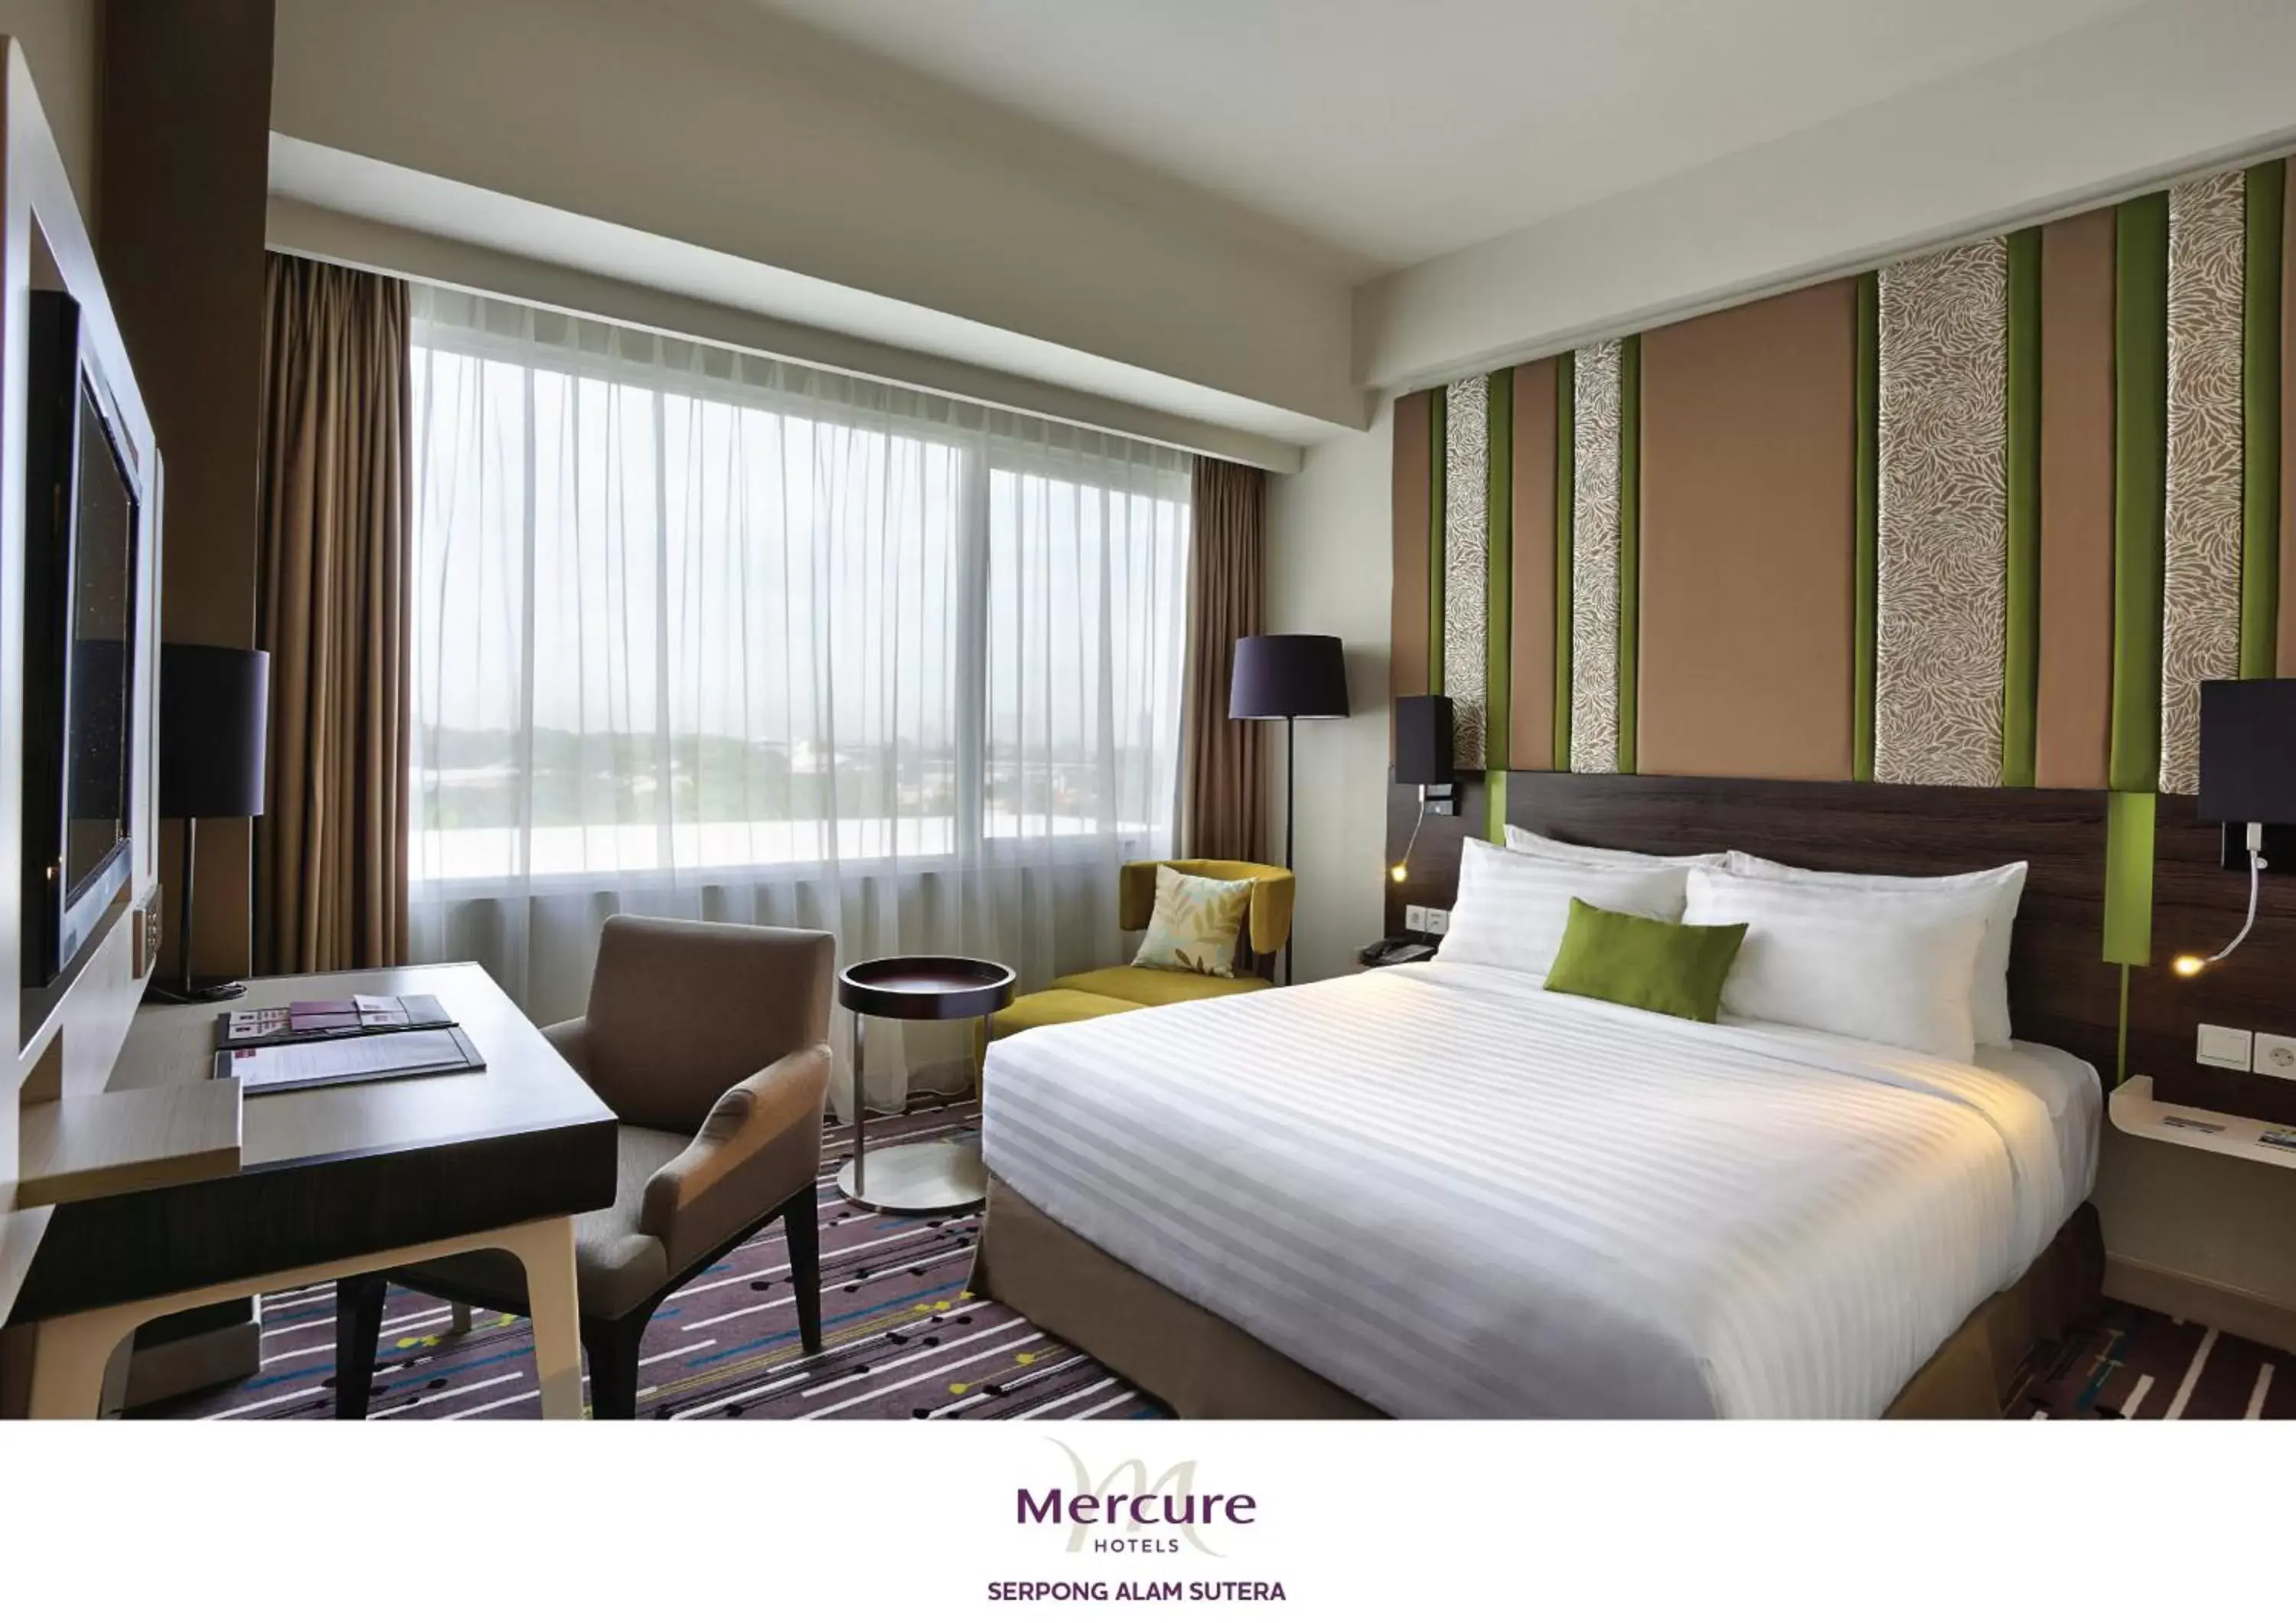 Day, Room Photo in Mercure Serpong Alam Sutera